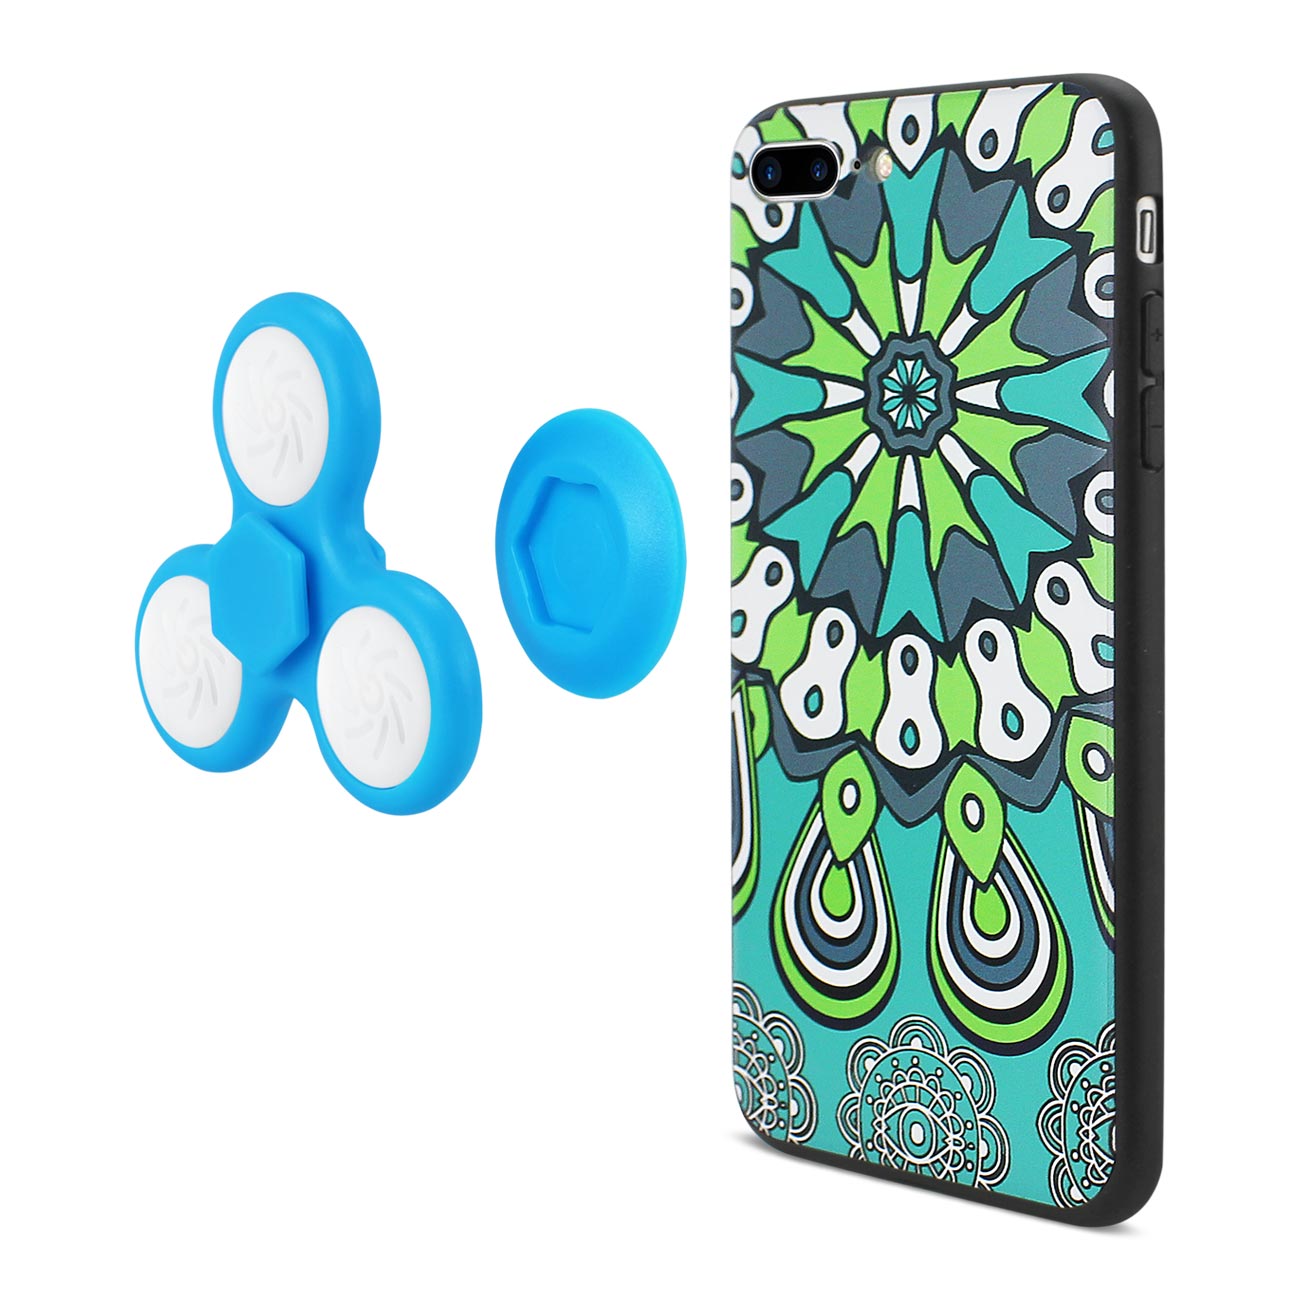 Design The Inspiration Of Peacock iPhone 7 Plus Case With Led Fidget Spinner In Turquoise